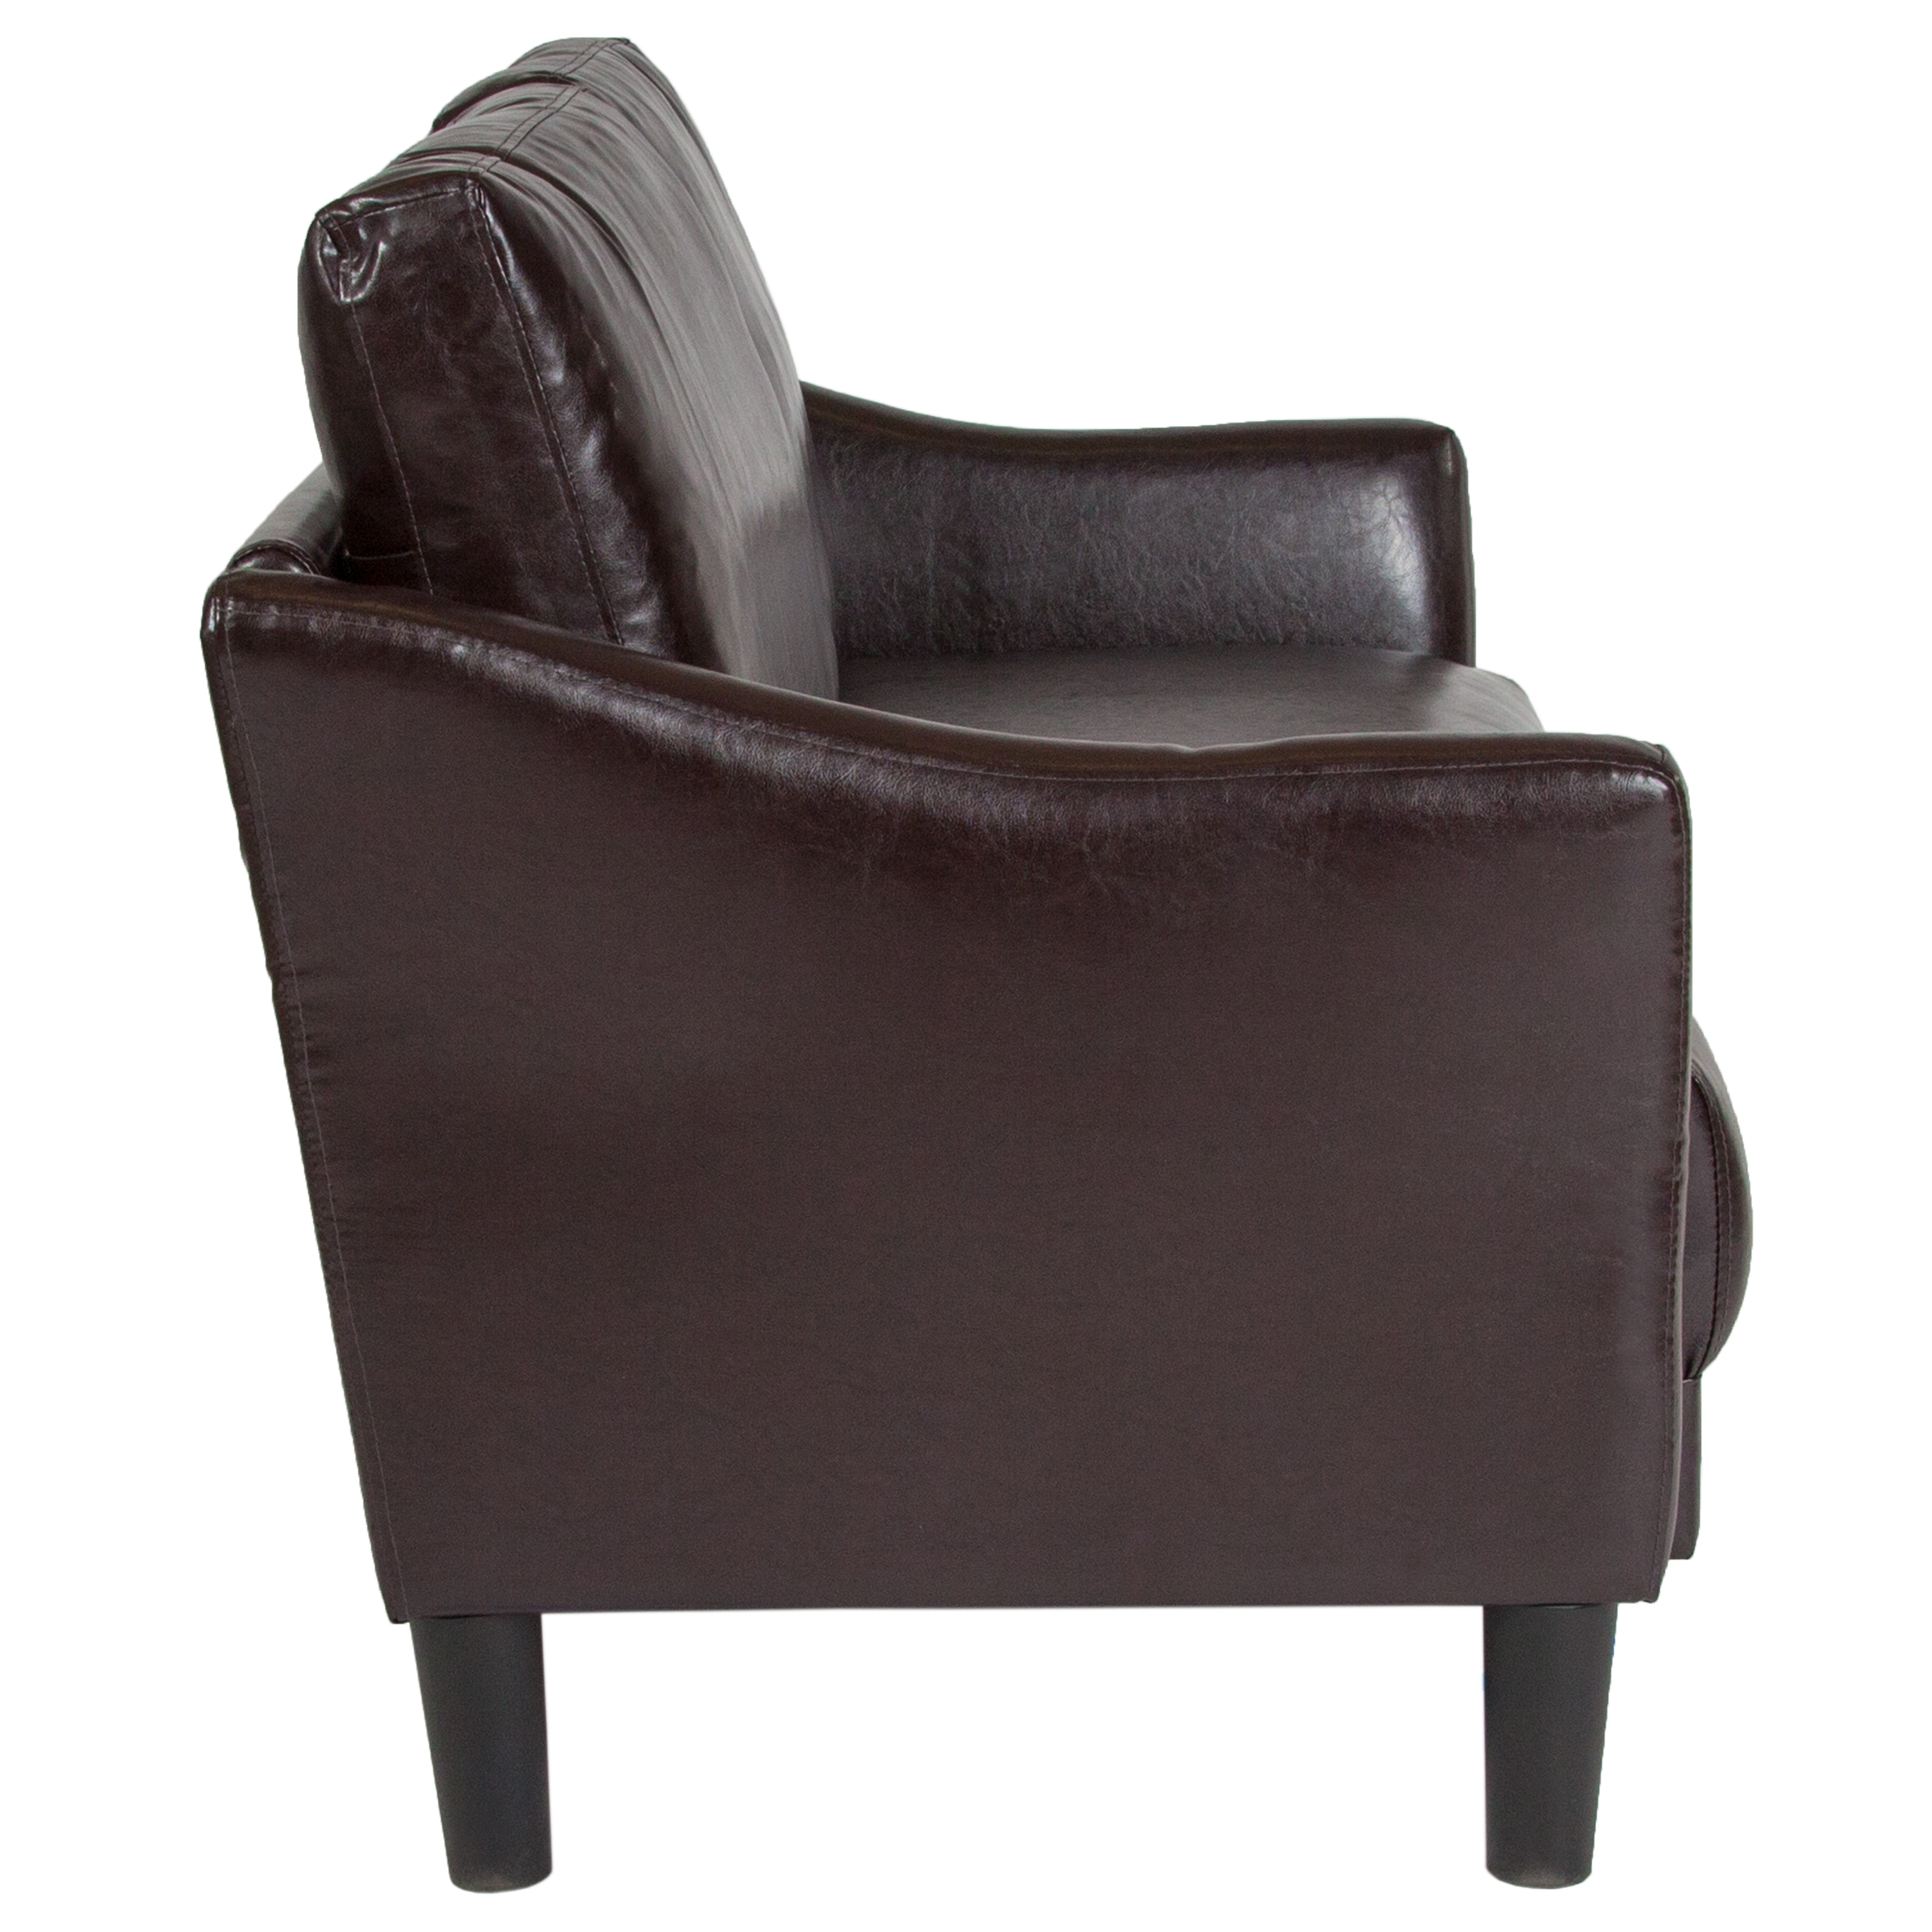 Flash Furniture Asti Upholstered Loveseat in Brown LeatherSoft - image 4 of 5